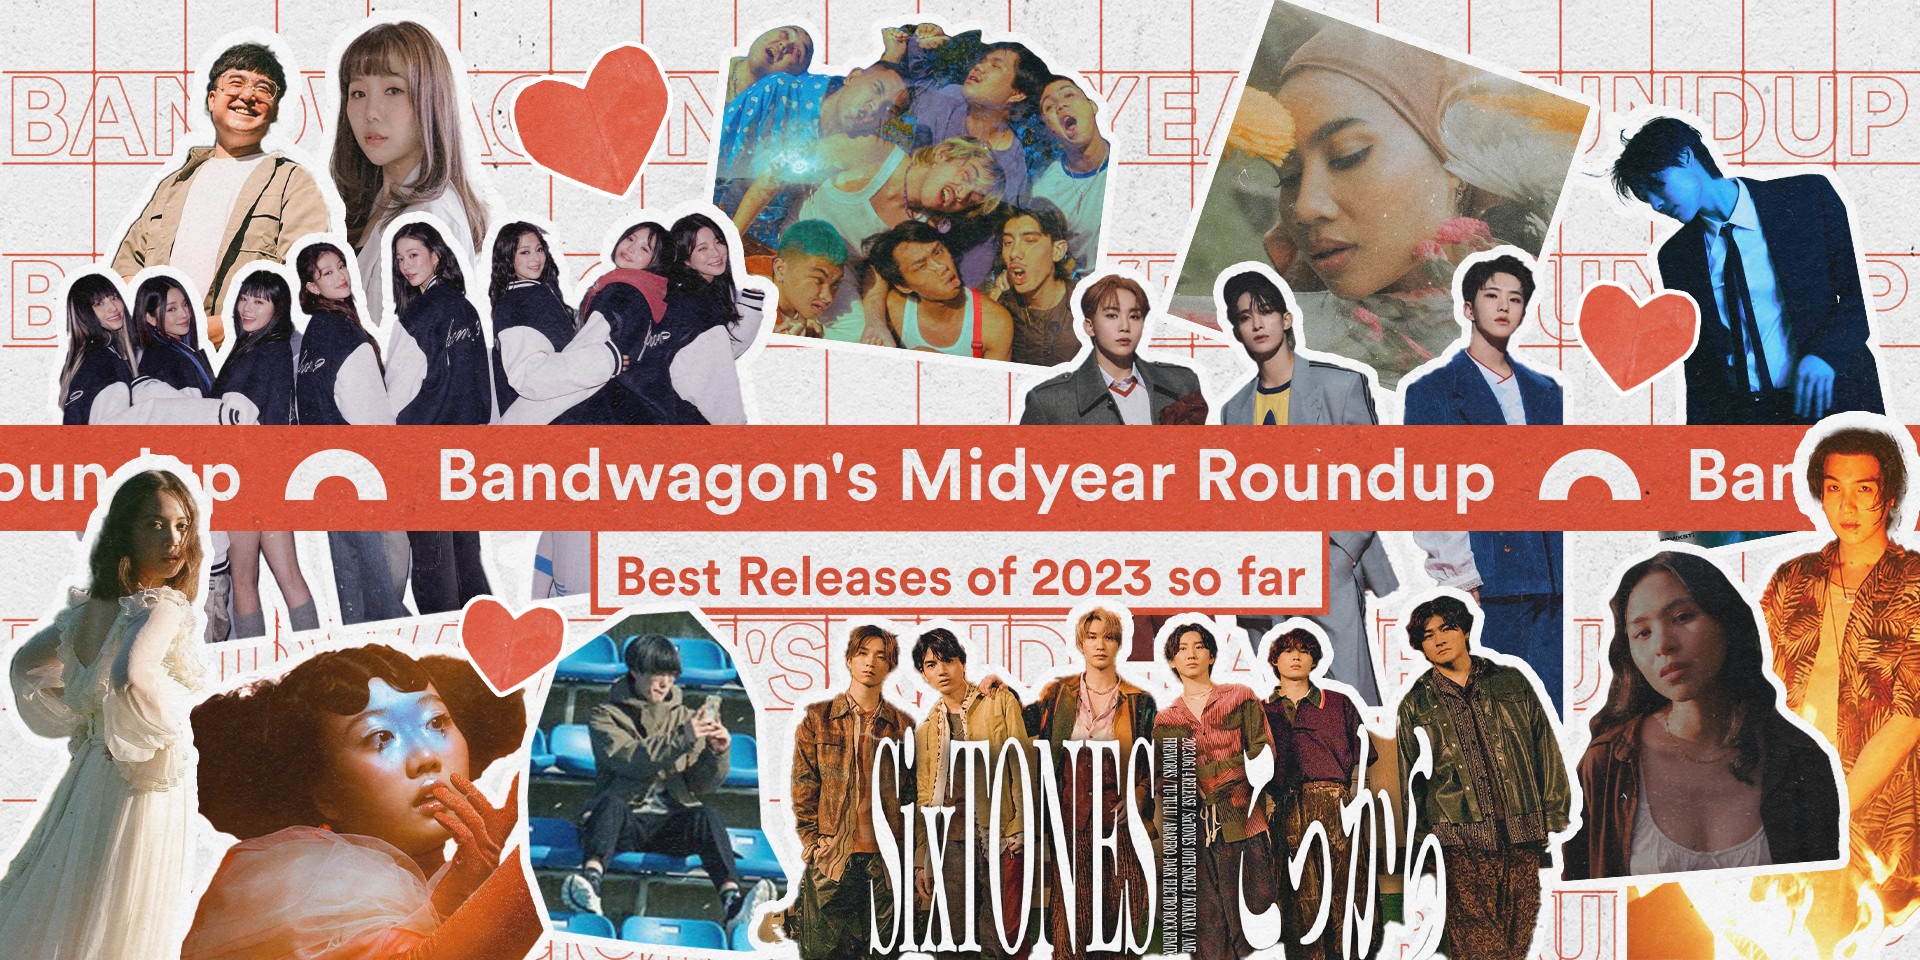 Bandwagon's Midyear Roundup: Top releases of 2023 so far – SUGA | Agust D, Laufey, fromis_9, SixTONES, SEVENTEEN's BSS, KINDRED, Yuna, and more